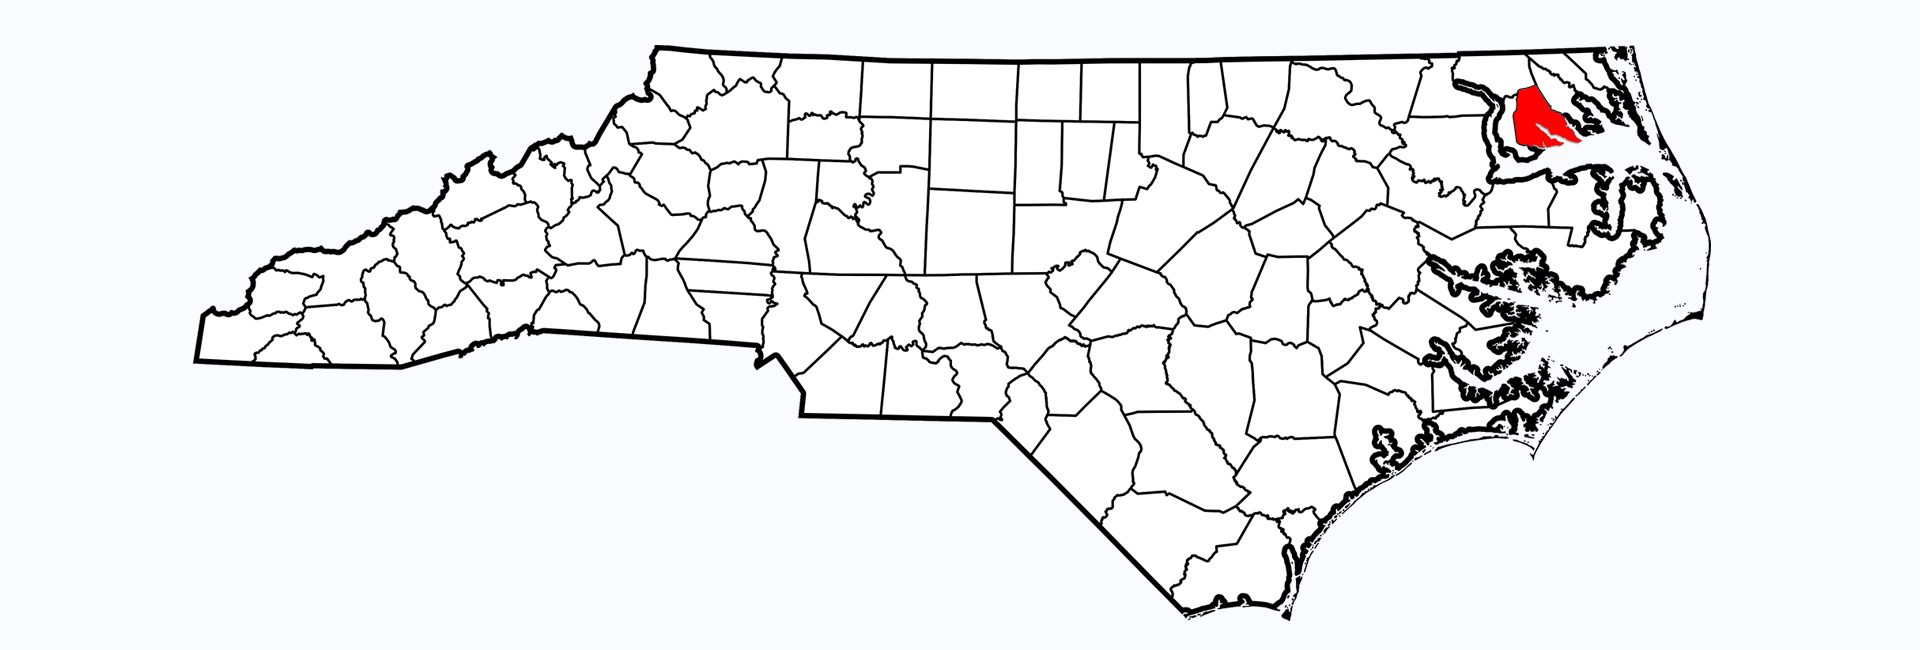 A map of north carolina with counties marked.